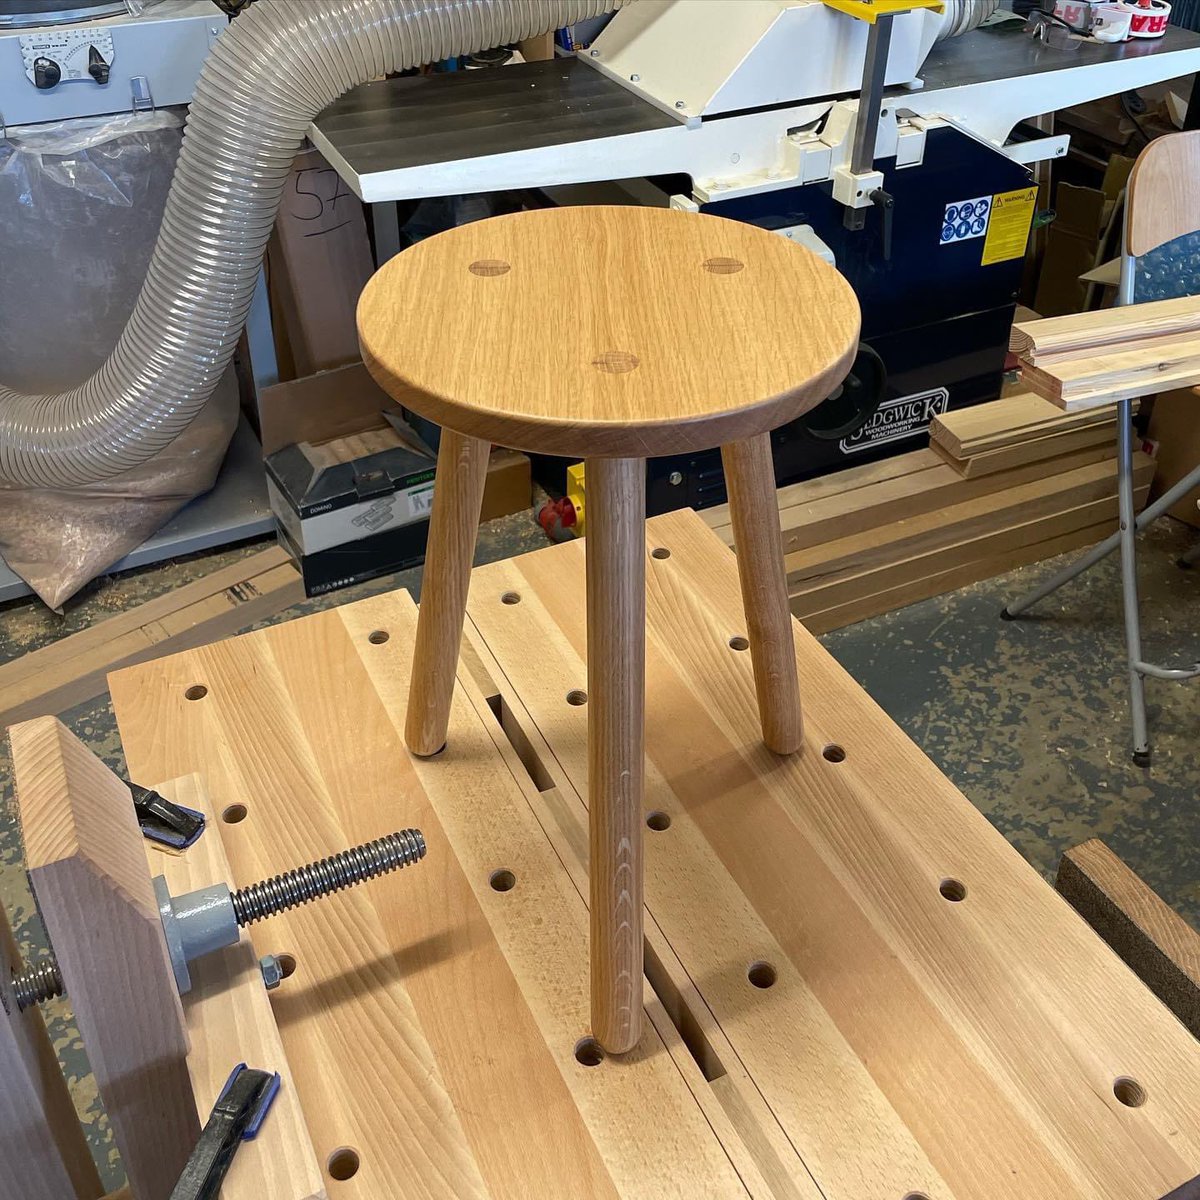 Latest Stable pieces to leave the workshop, an occasional table with a superb English oak top and a standard stool 😎

#stablestool #oakstool #furniture